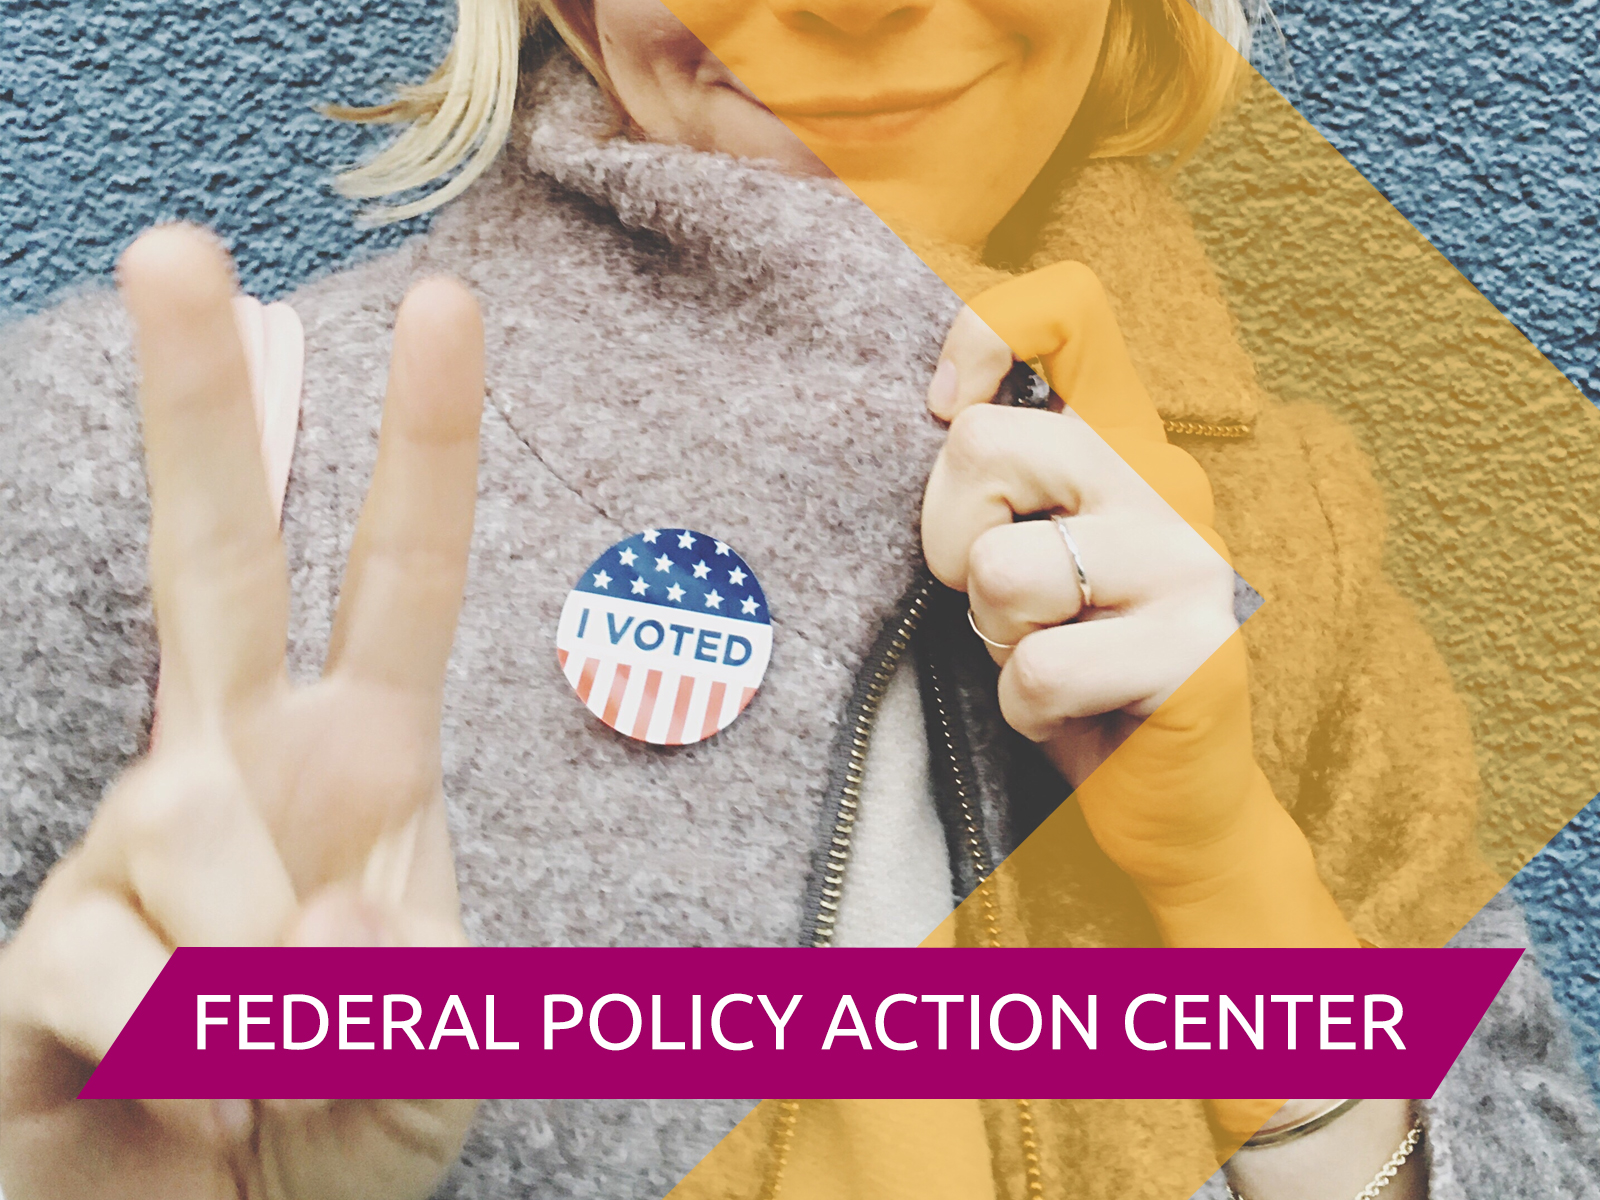 Woman with "I Voted" sticker holding up the peace sign and "Federal Policy Action Center"